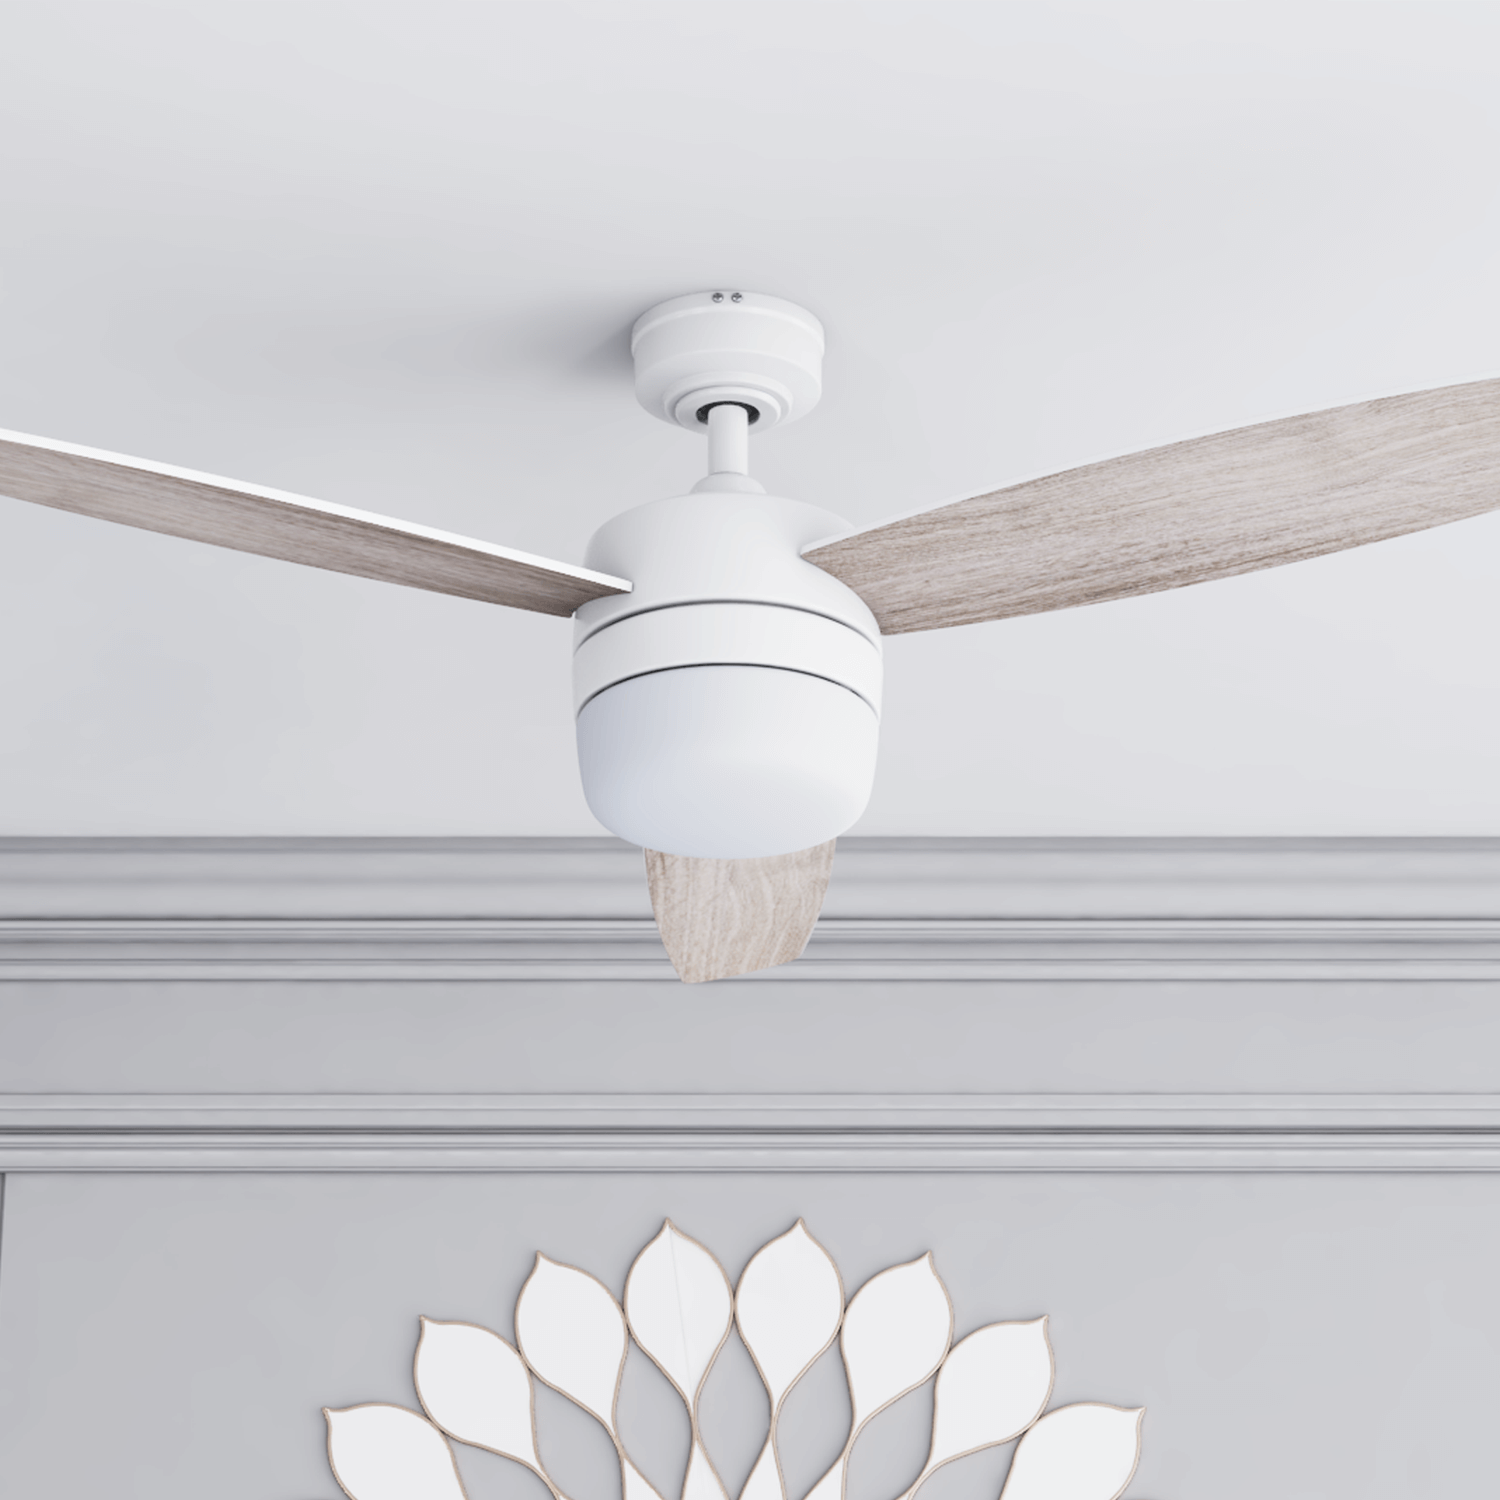 52 Inch Enoki, Bright White, Remote Control, Smart Ceiling Fan by Prominence Home